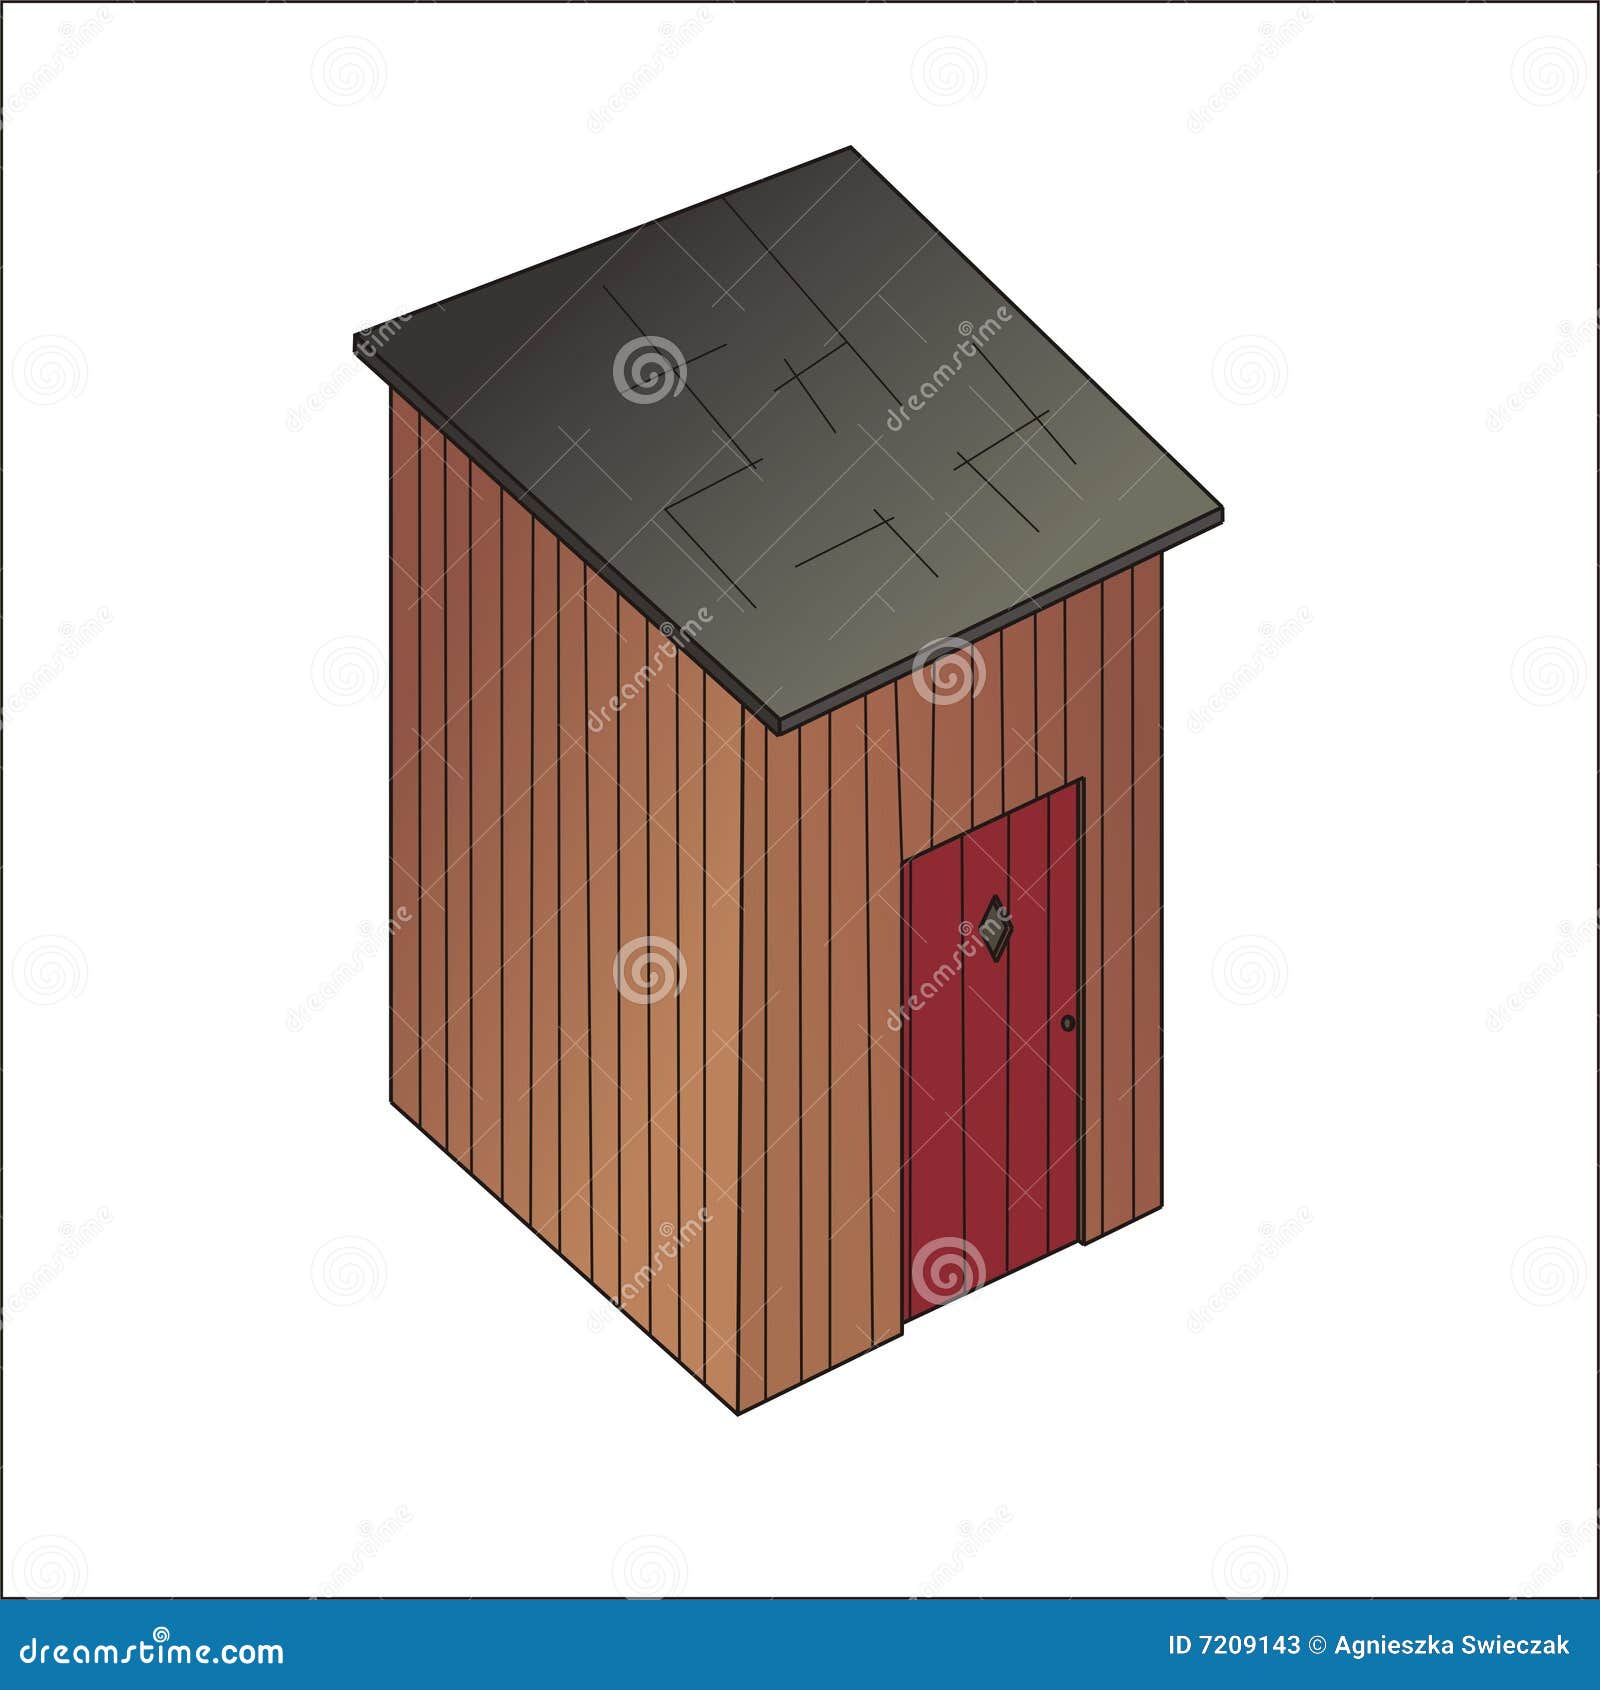 the wooden privy